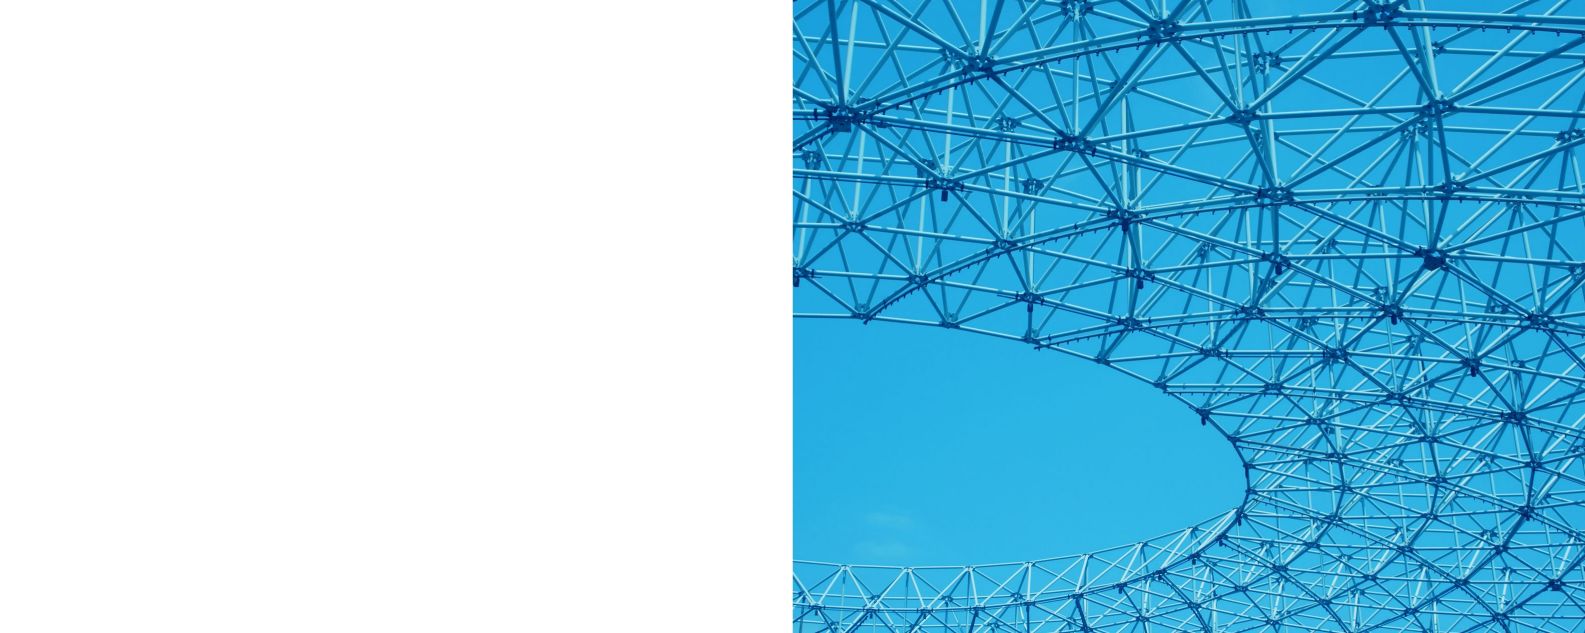 Metal geometric structure with a blue sky background